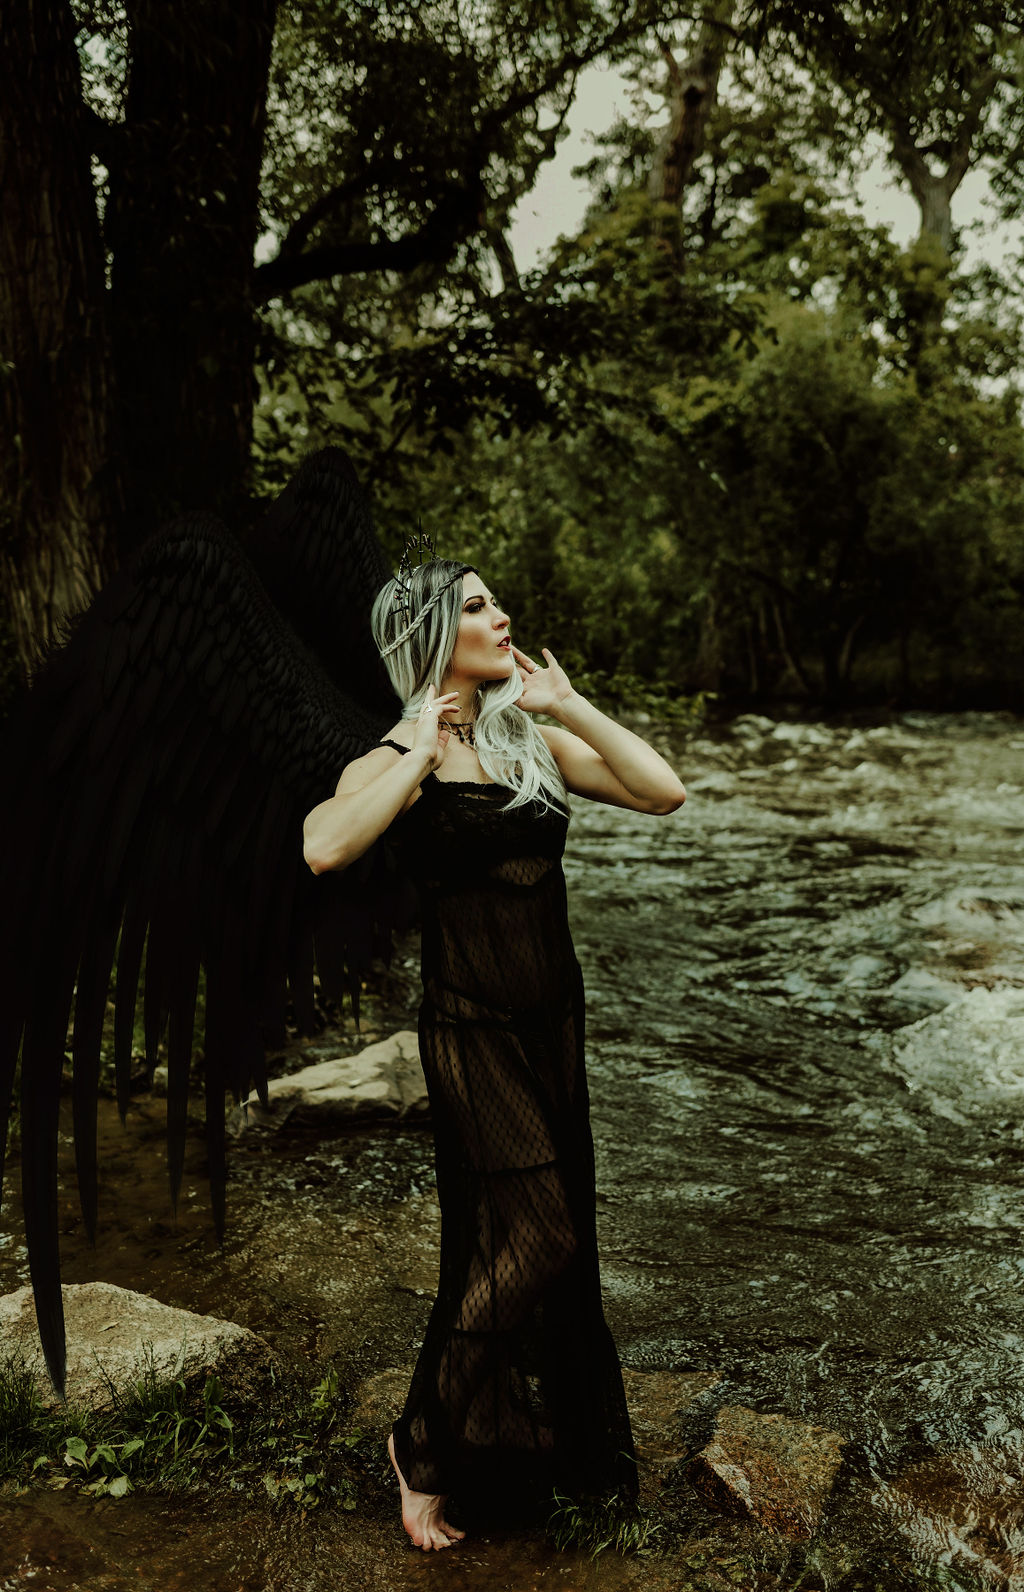 Kendra Colleen Photography takes fantasy boudoir photo of a woman in a black dress standing in a creek with a forest in the background. She has a pair of large black wings.